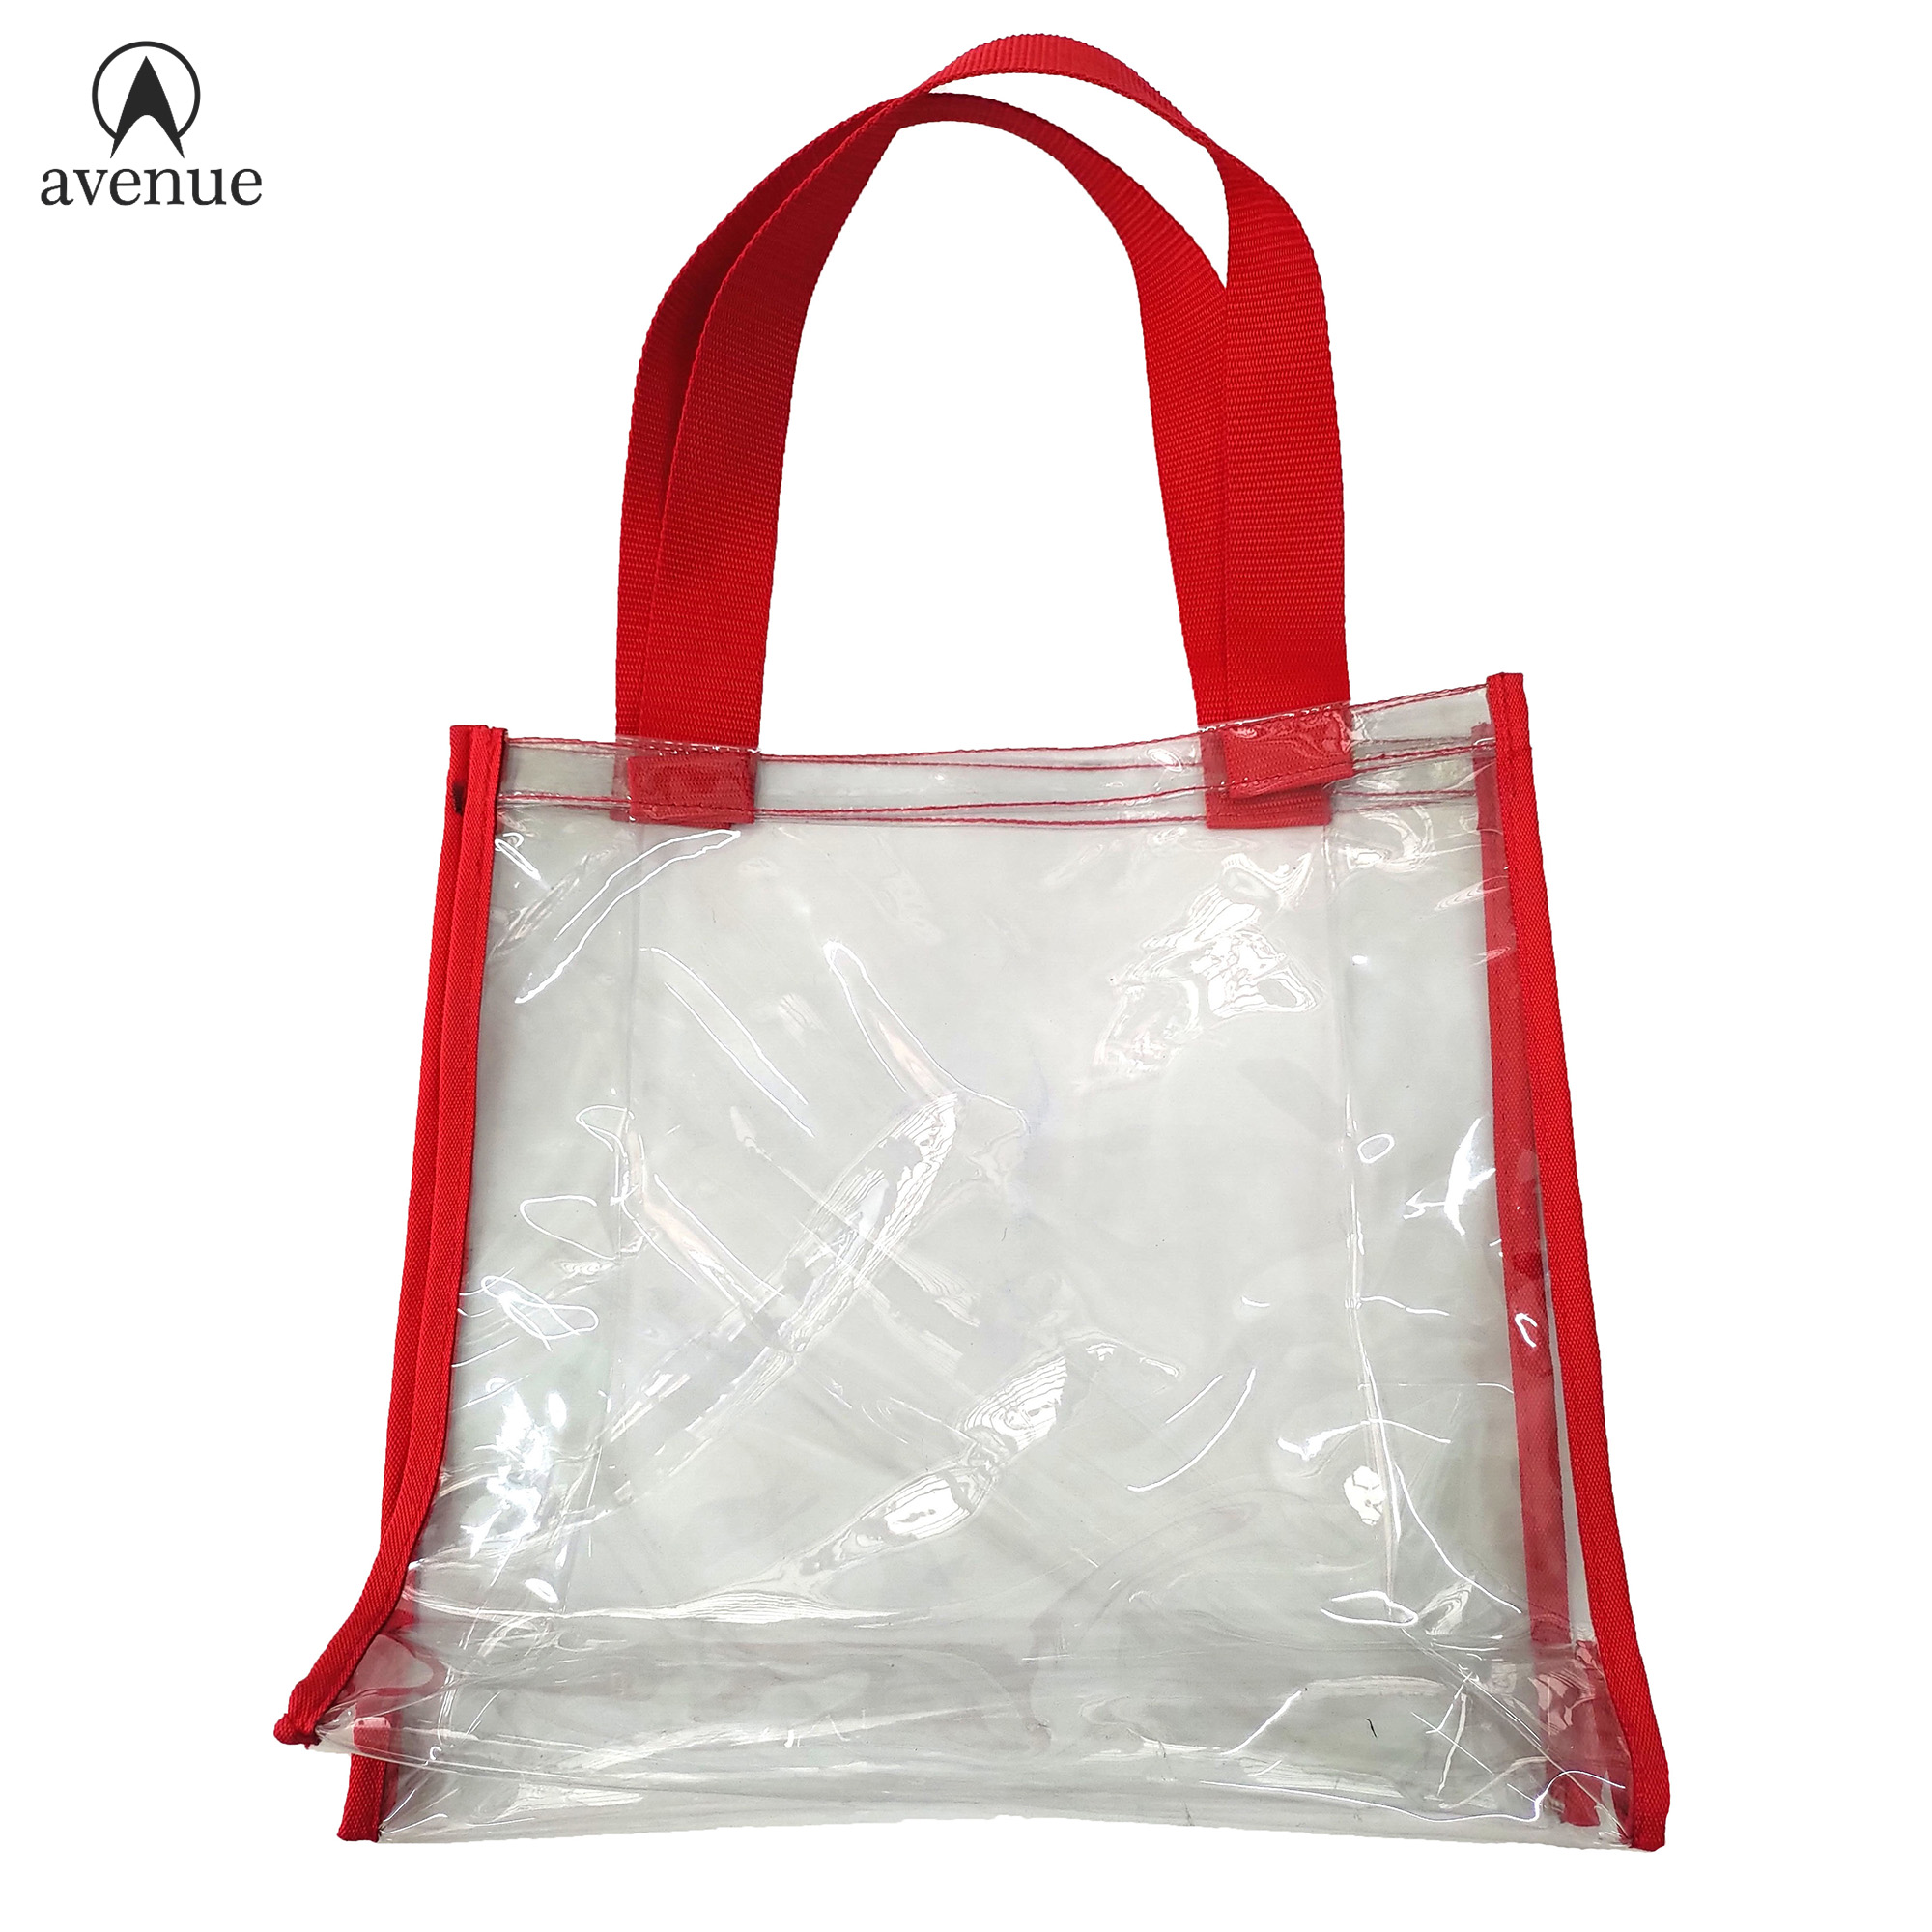 CLEAR BAG POLICY – University of South Carolina Athletics-tuongthan.vn